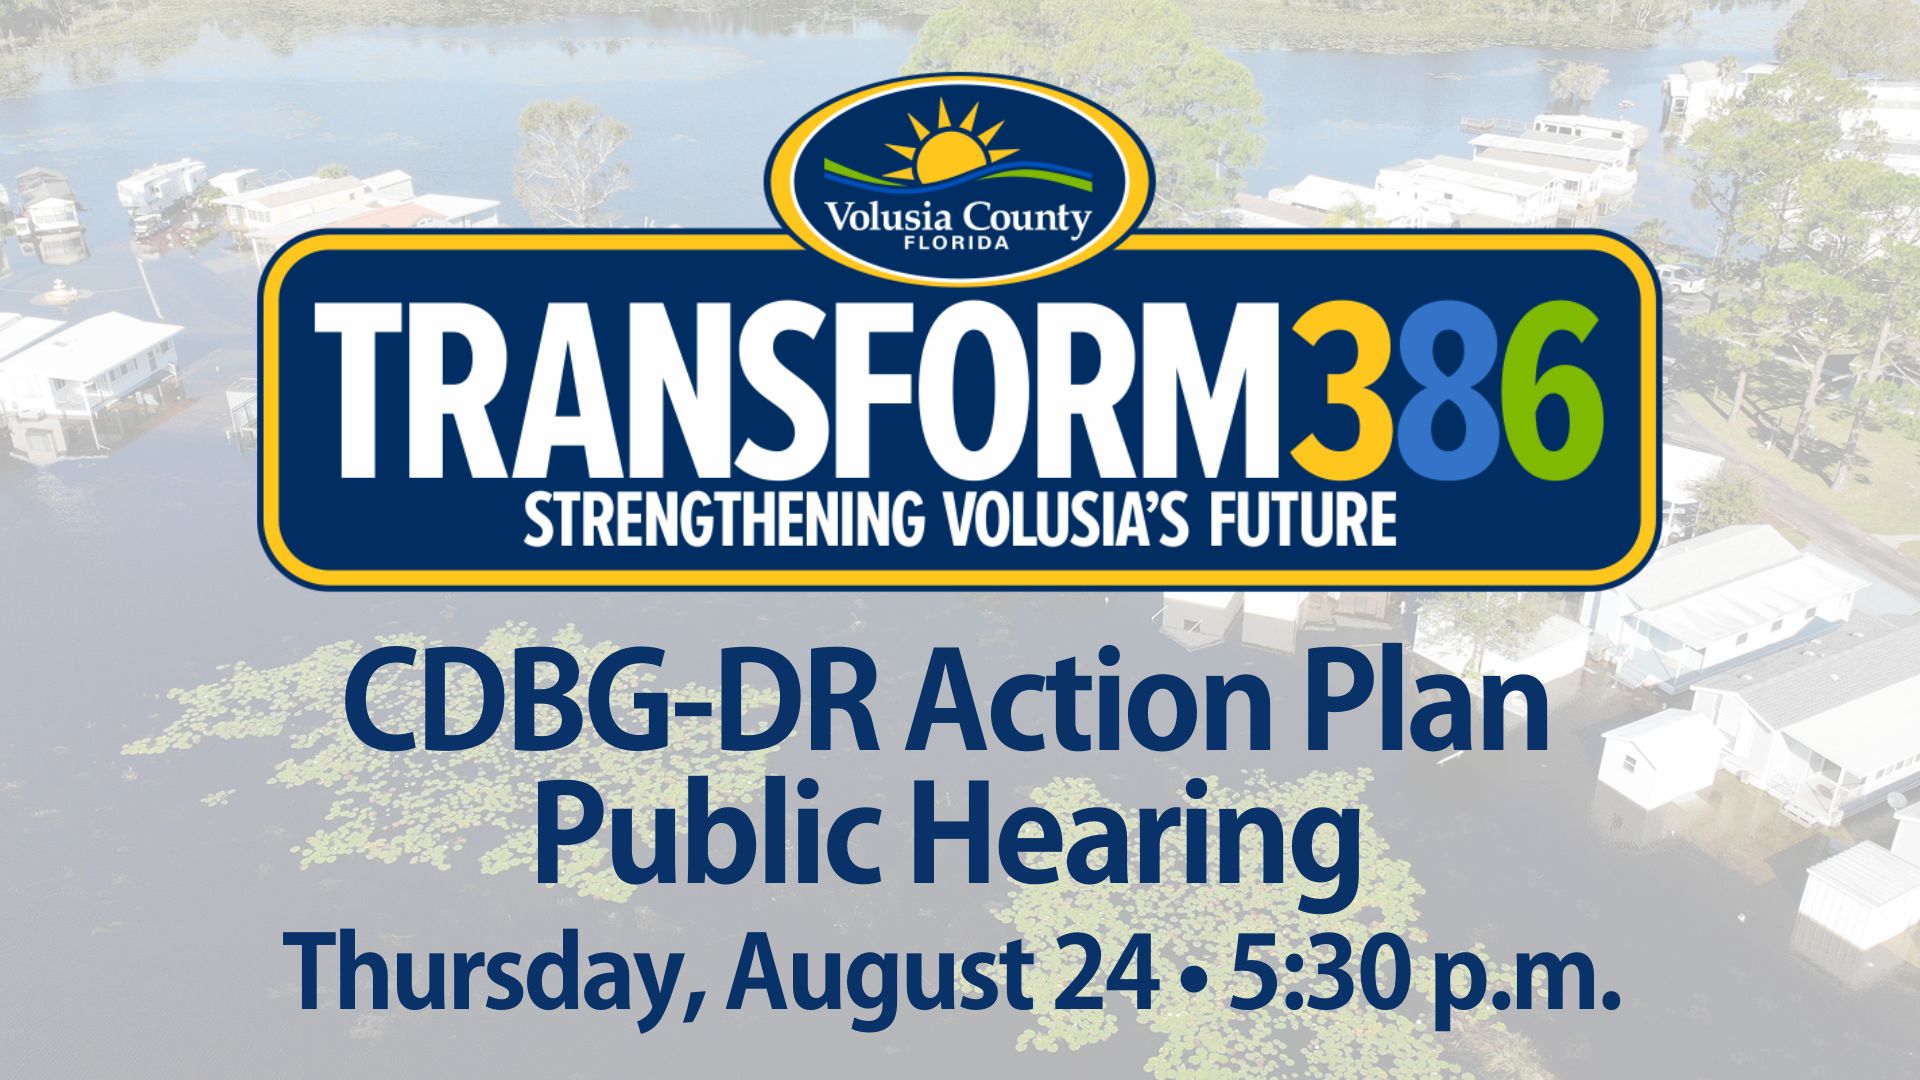 transform386 action plan public hearing Thursday august 24. watch it live on youtube